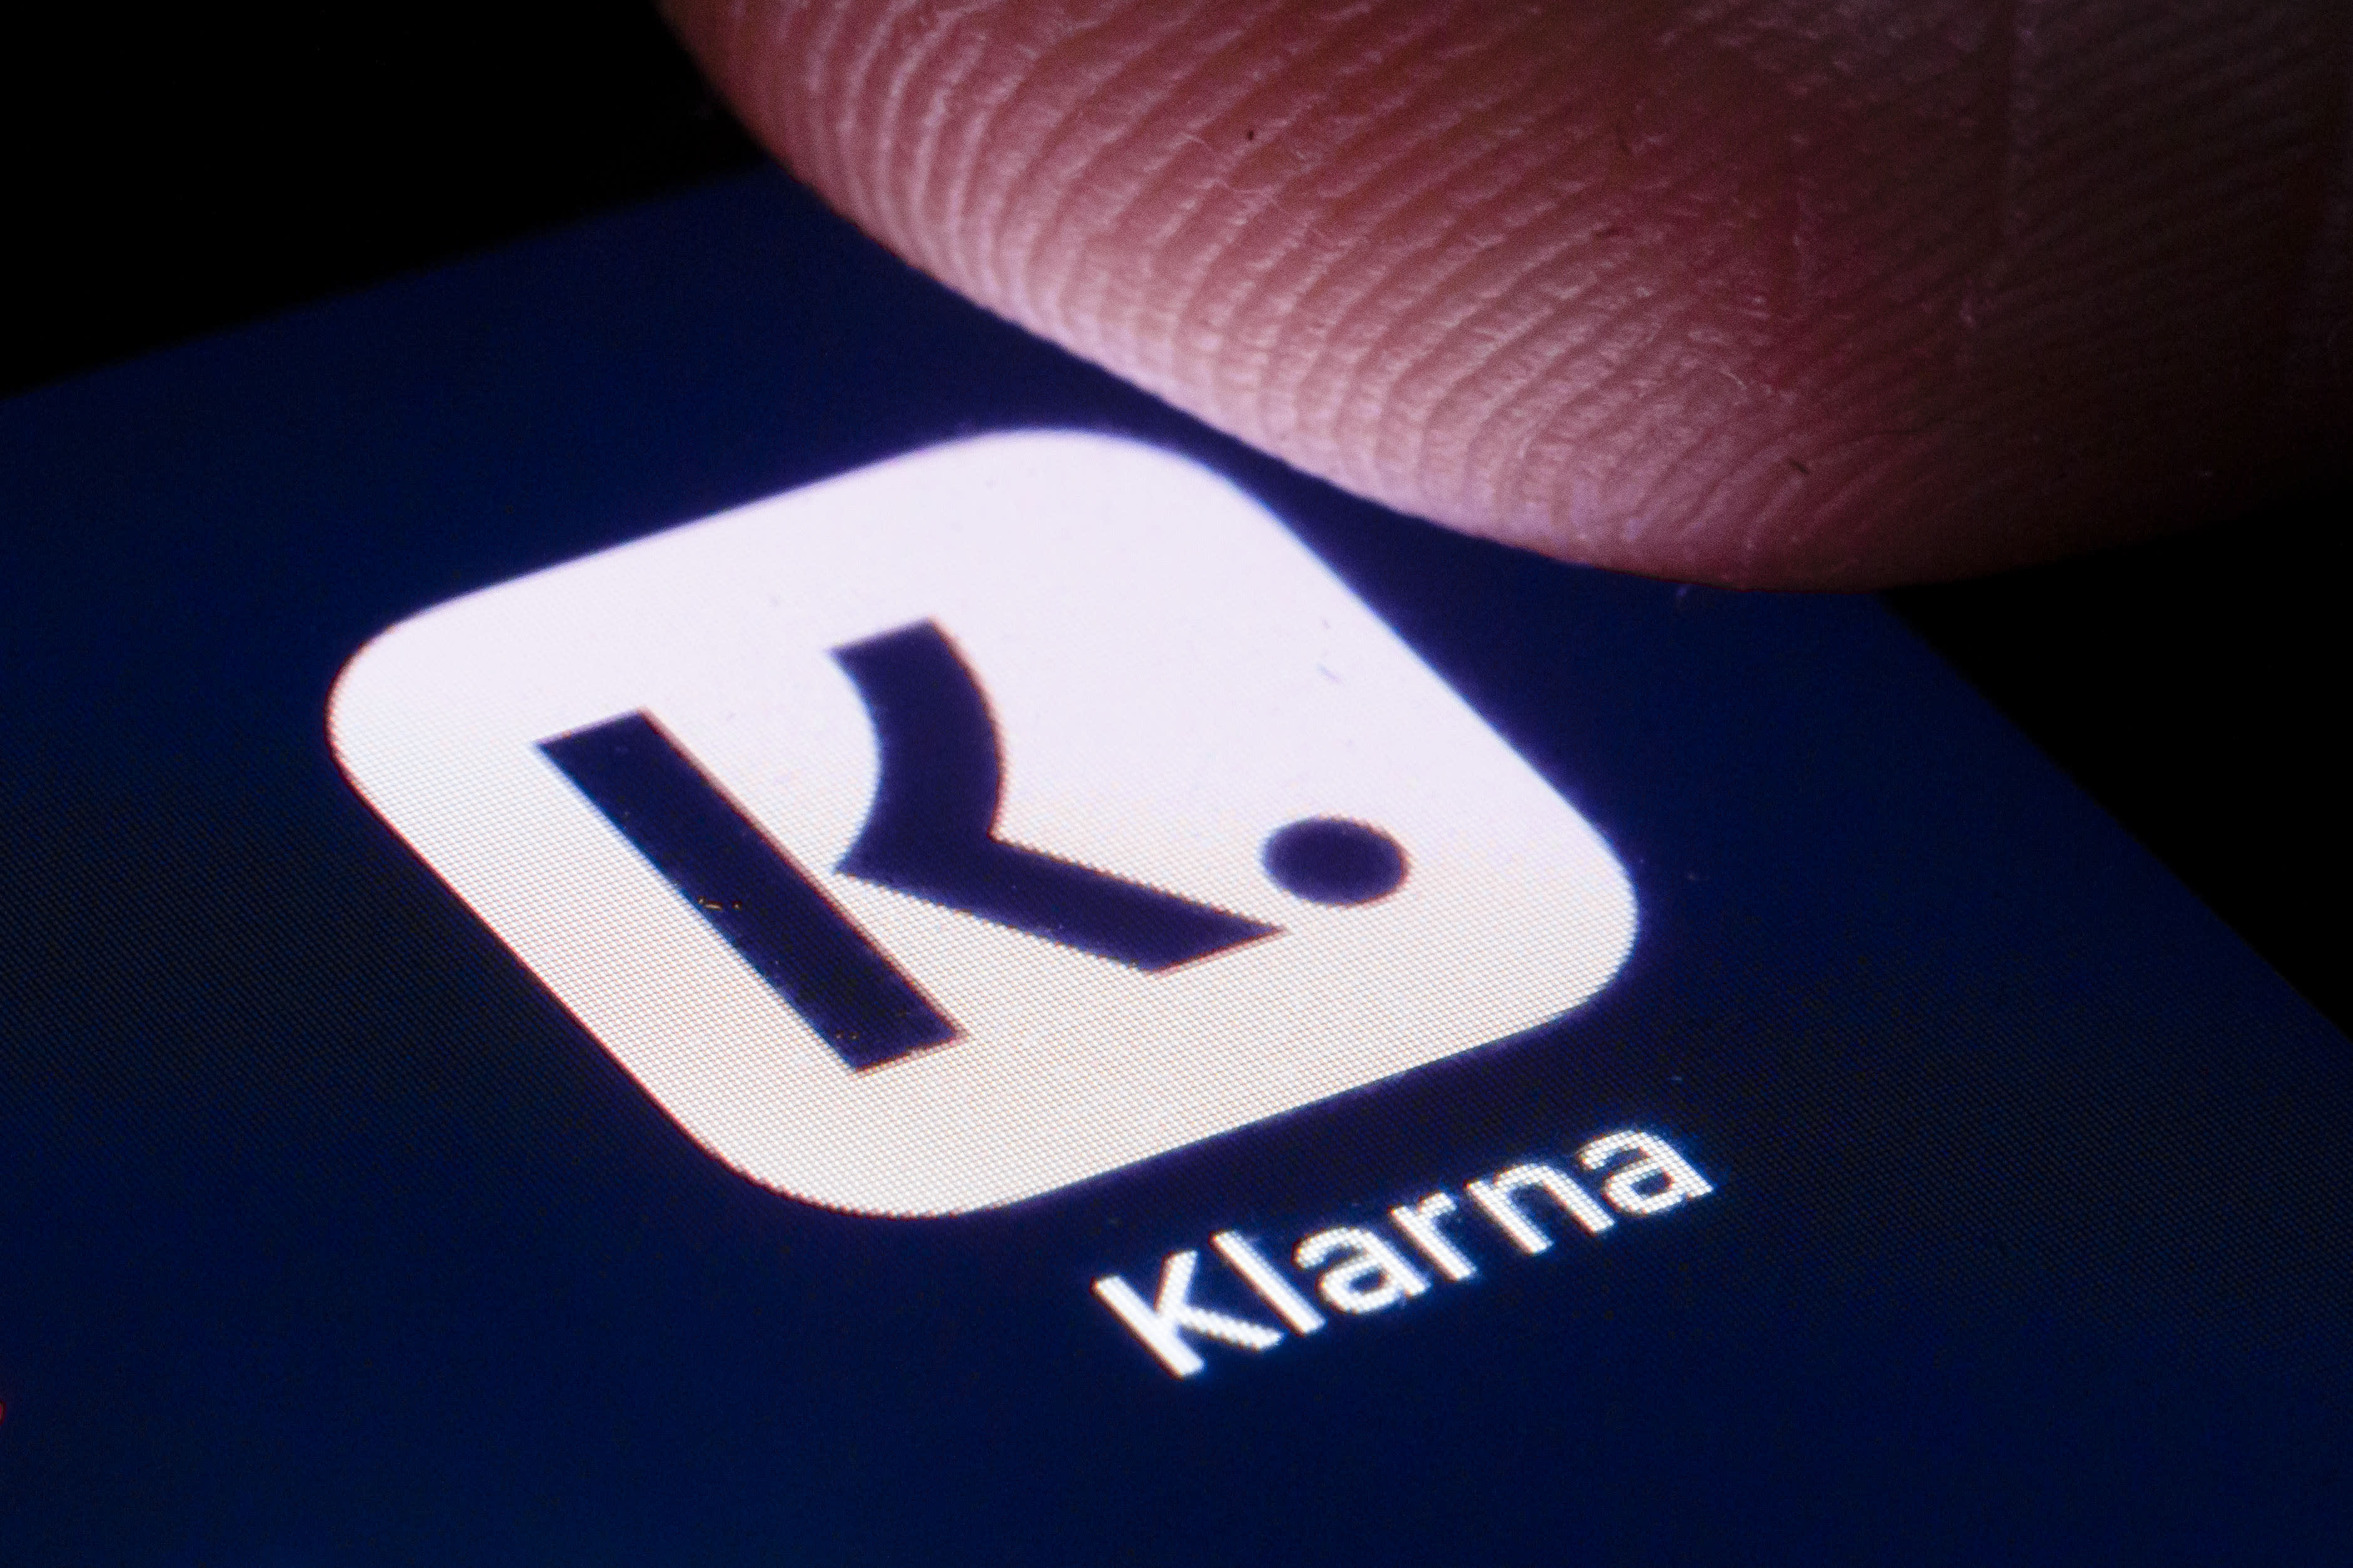 UK to regulate businesses such as Klarna and Clearpay for later purchase (BNPL)